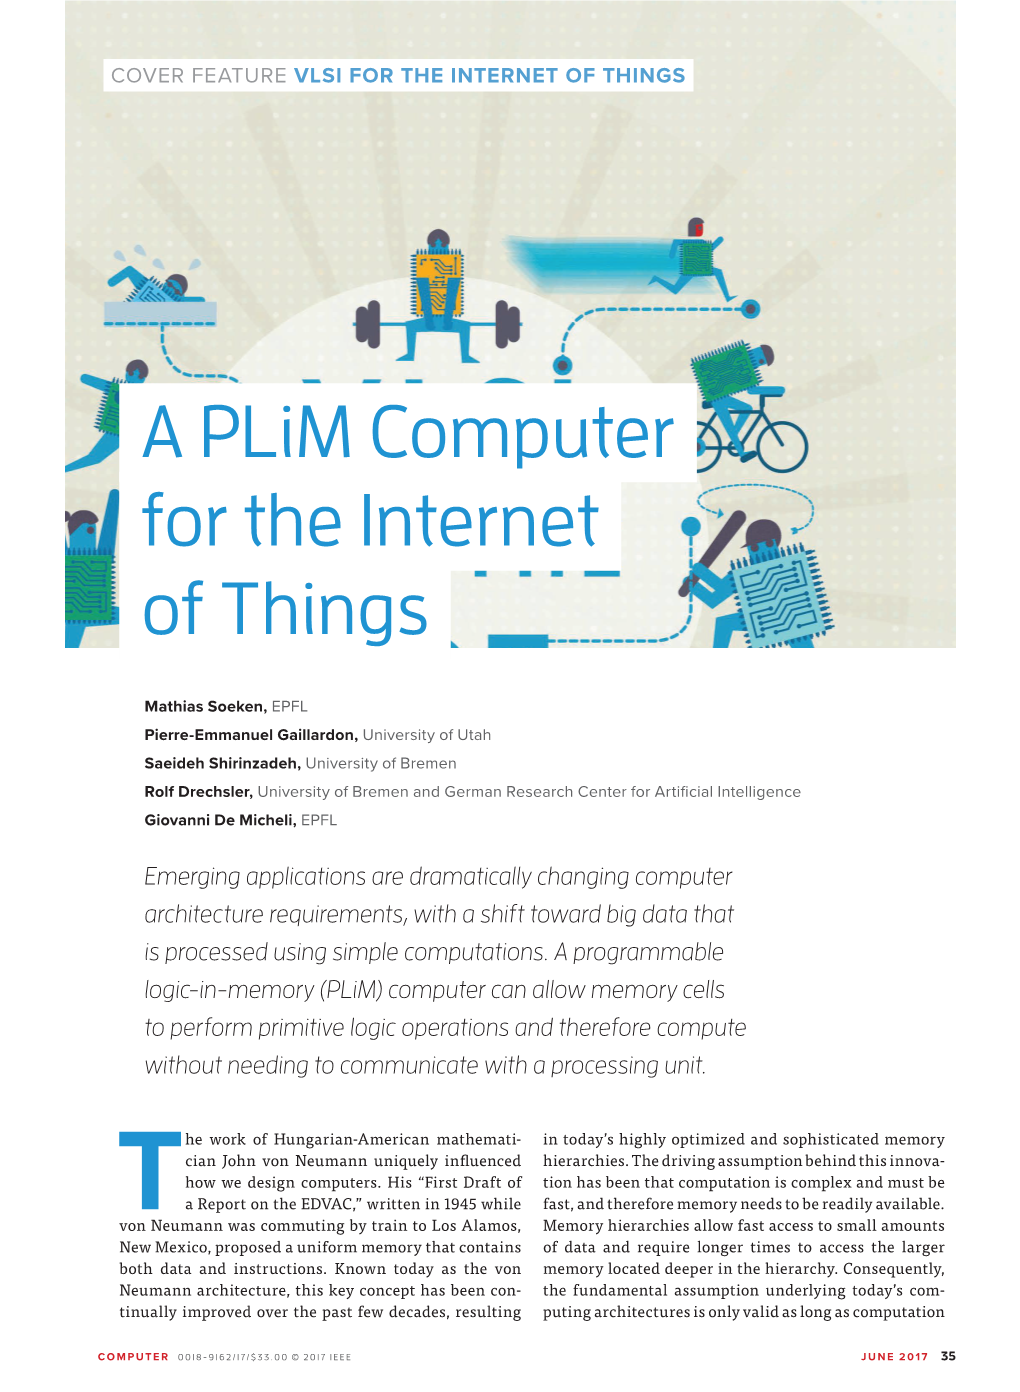 A Plim Computer for the Internet of Things, in Computer